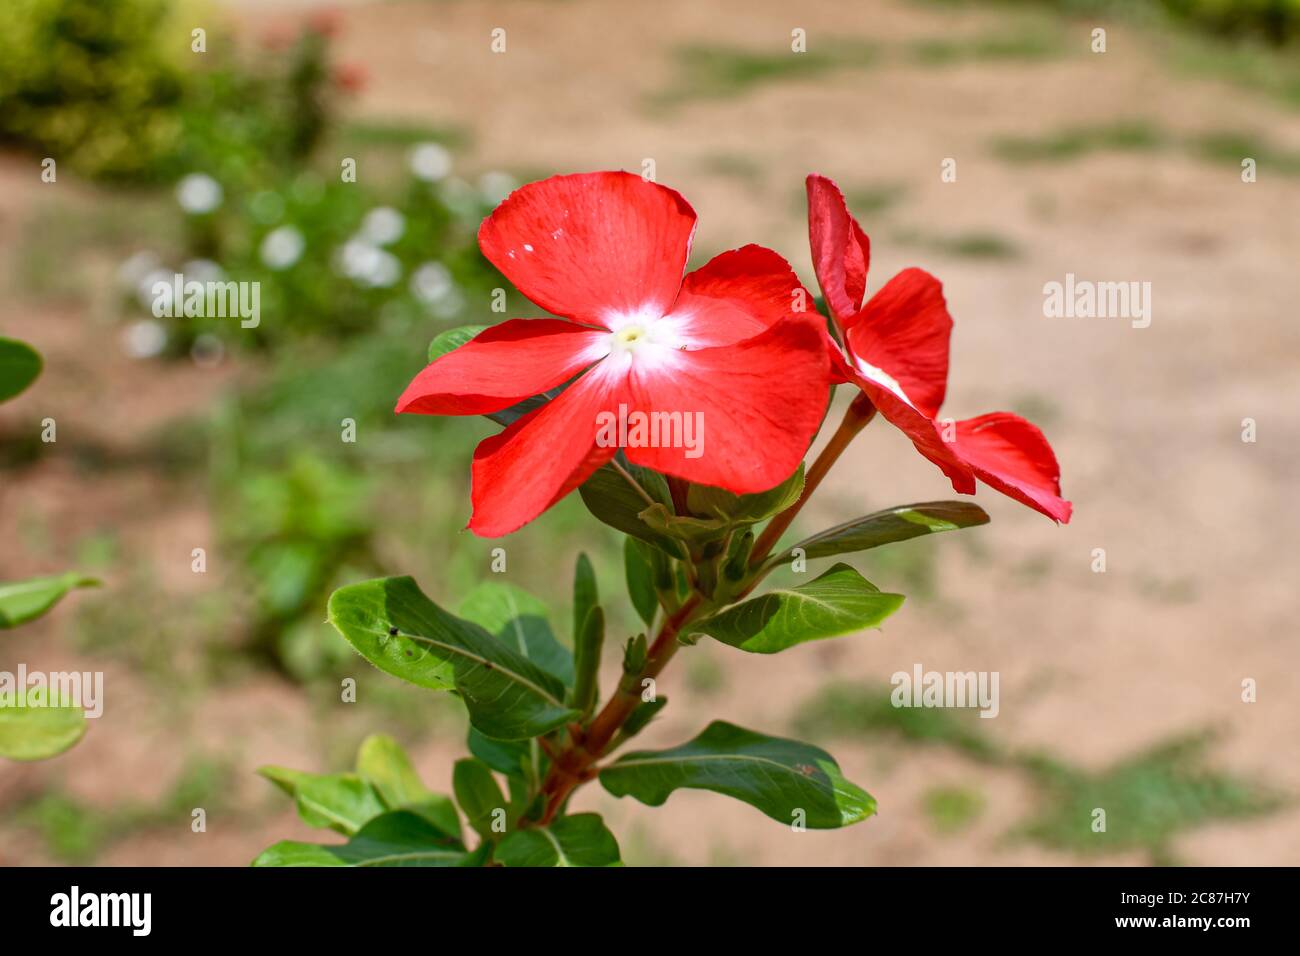 Red Tecoma Flowers With Green Leaves & Branches On Tree. 04 Stock Photo